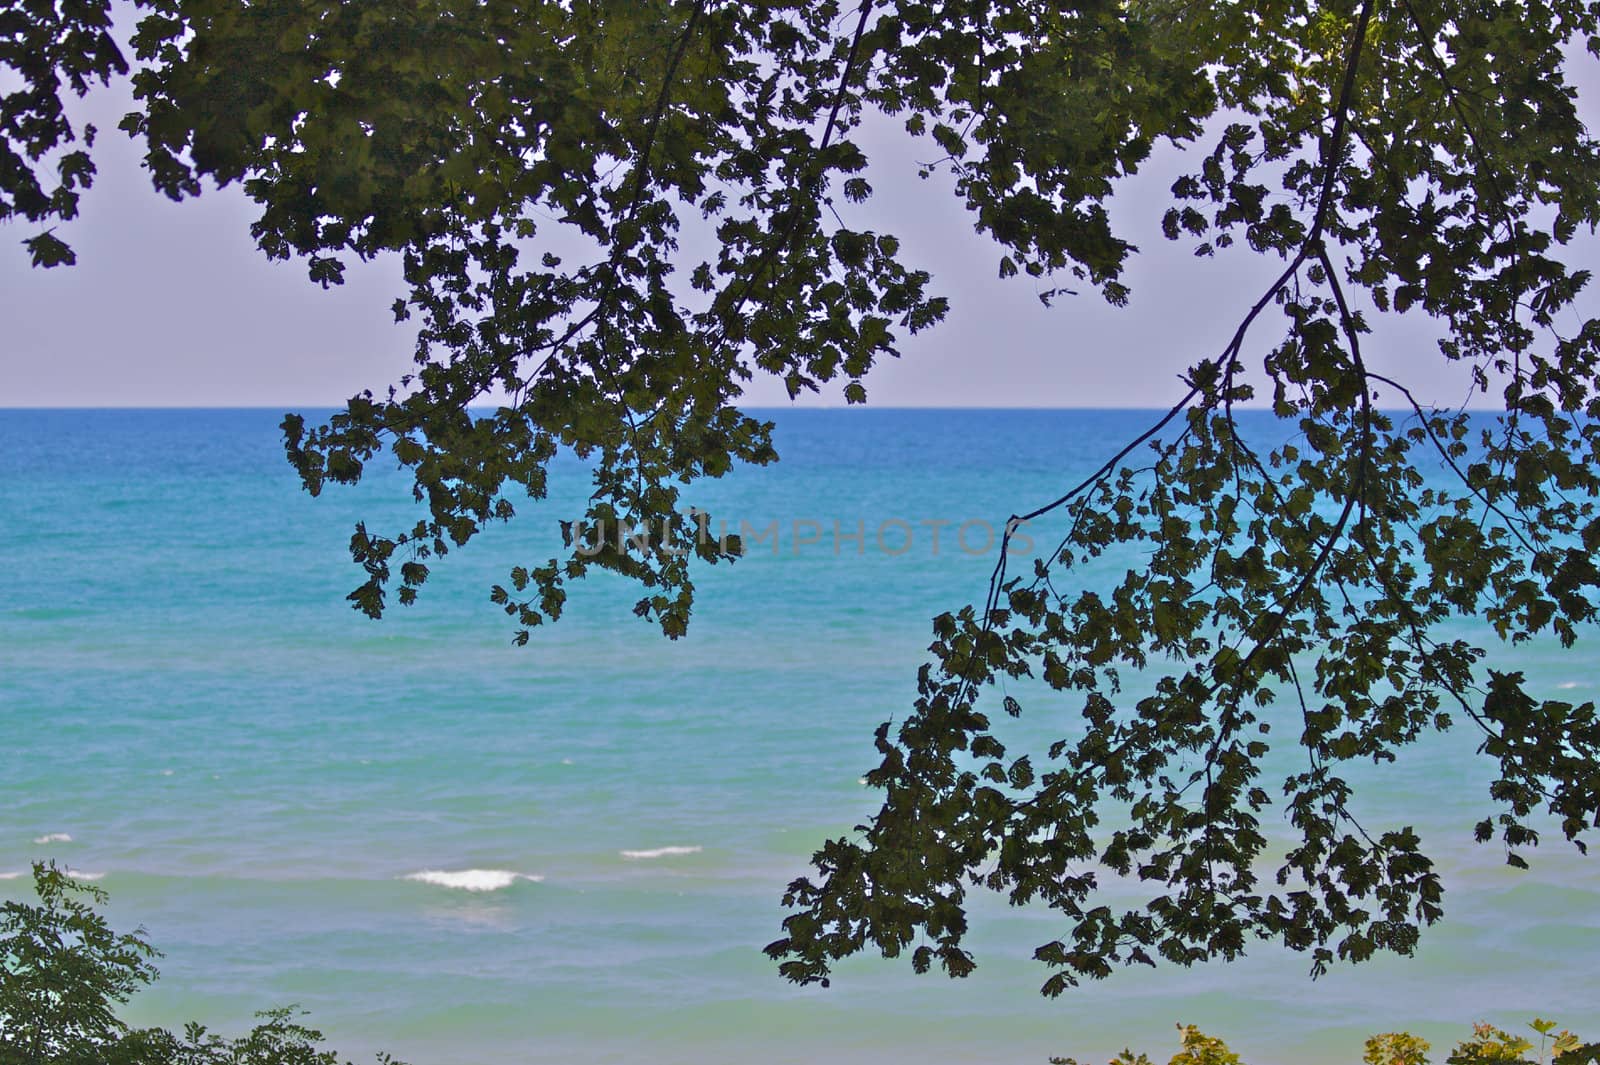 Lake michican coastline viewed from a cliff through and bordered by the leaves of a tree